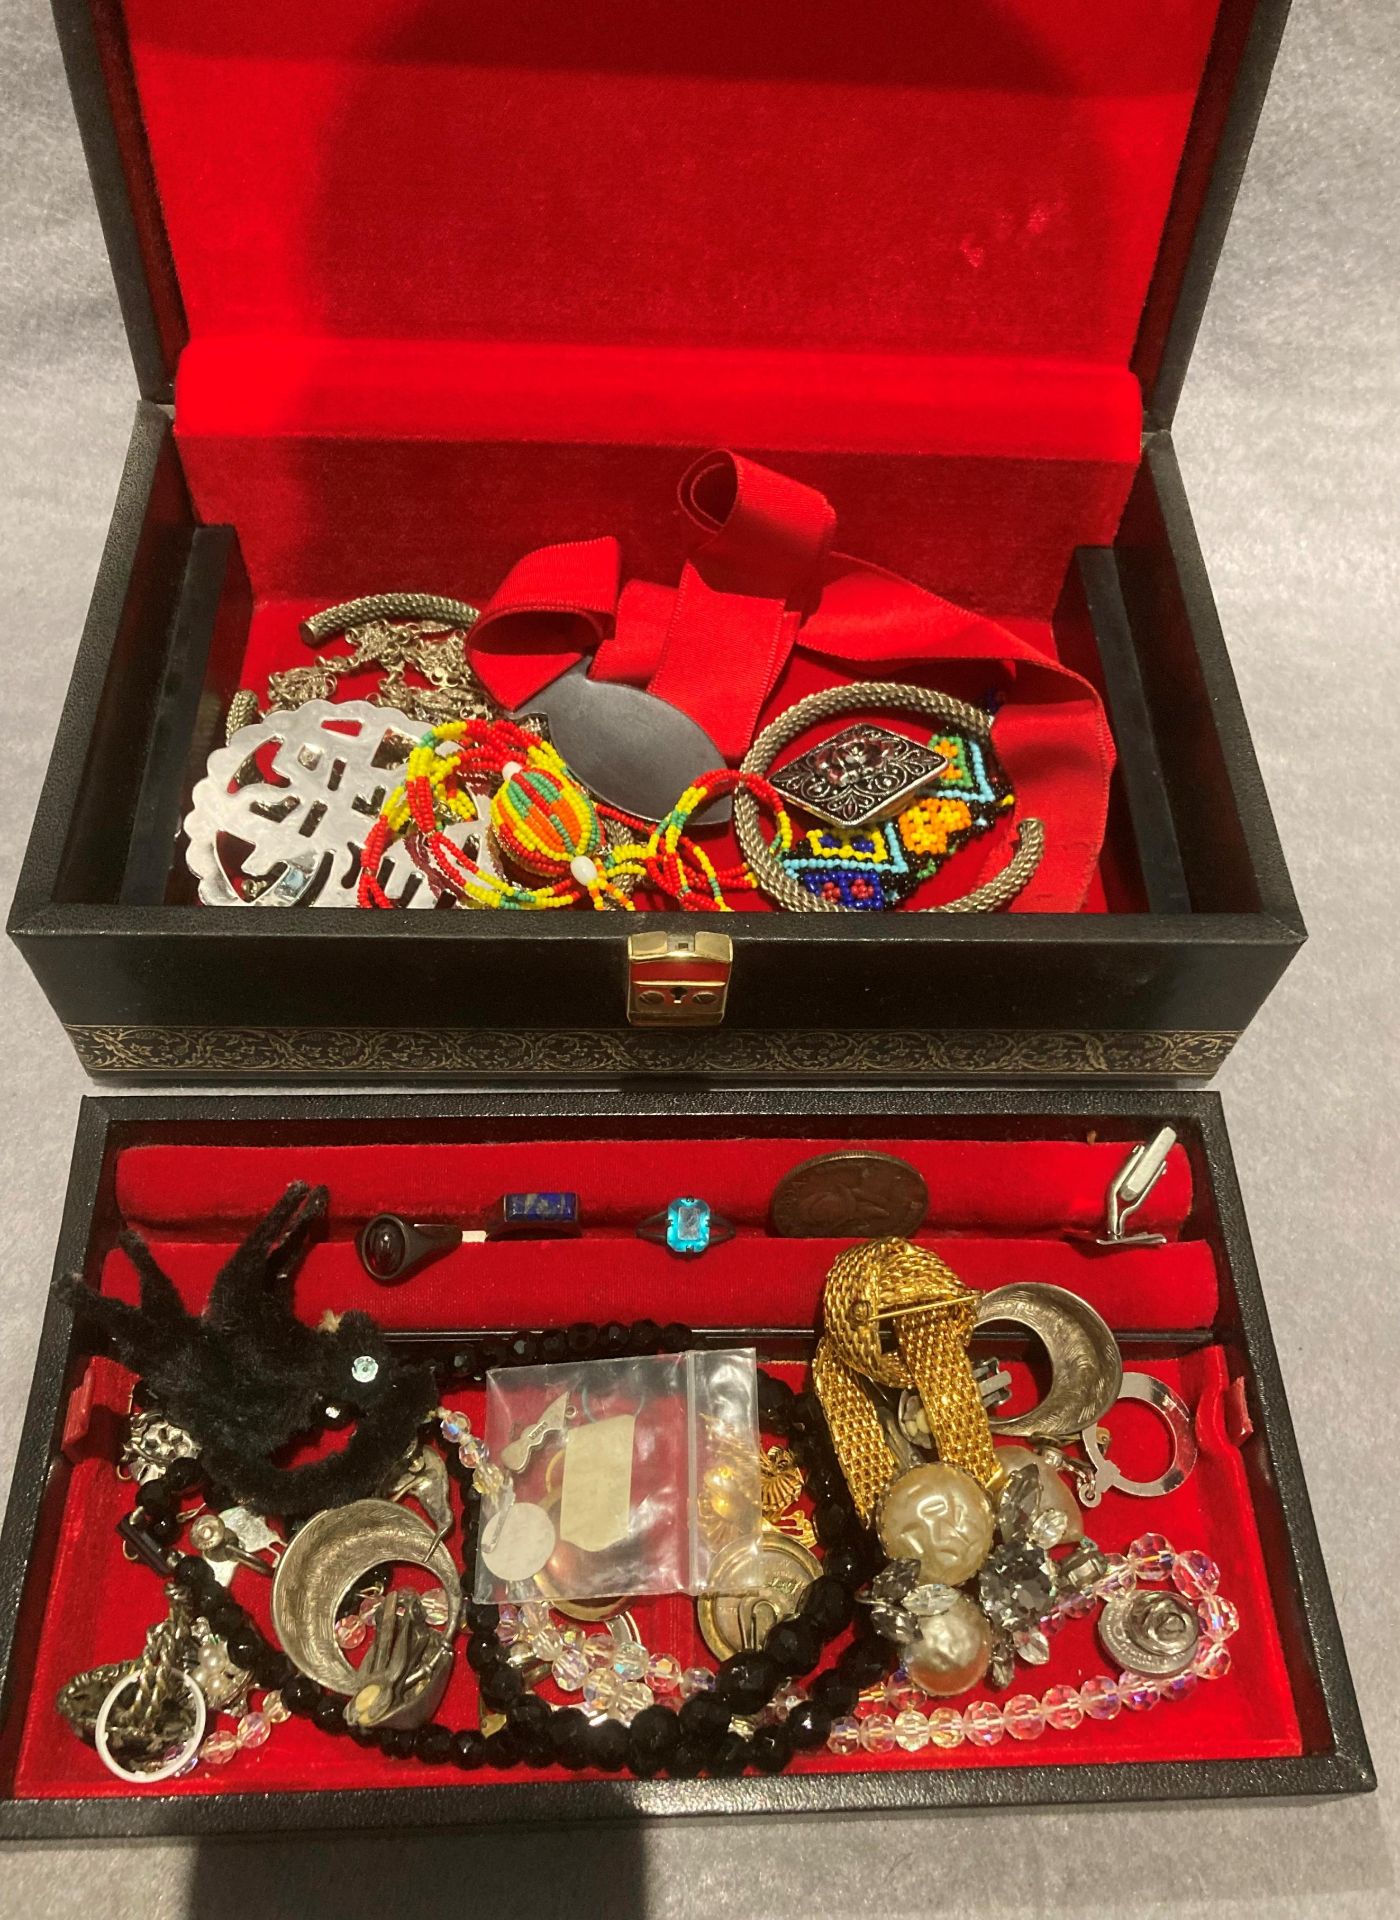 Contents to jewellery box - costume jewellery including three silver rings, brooches, cufflinks,